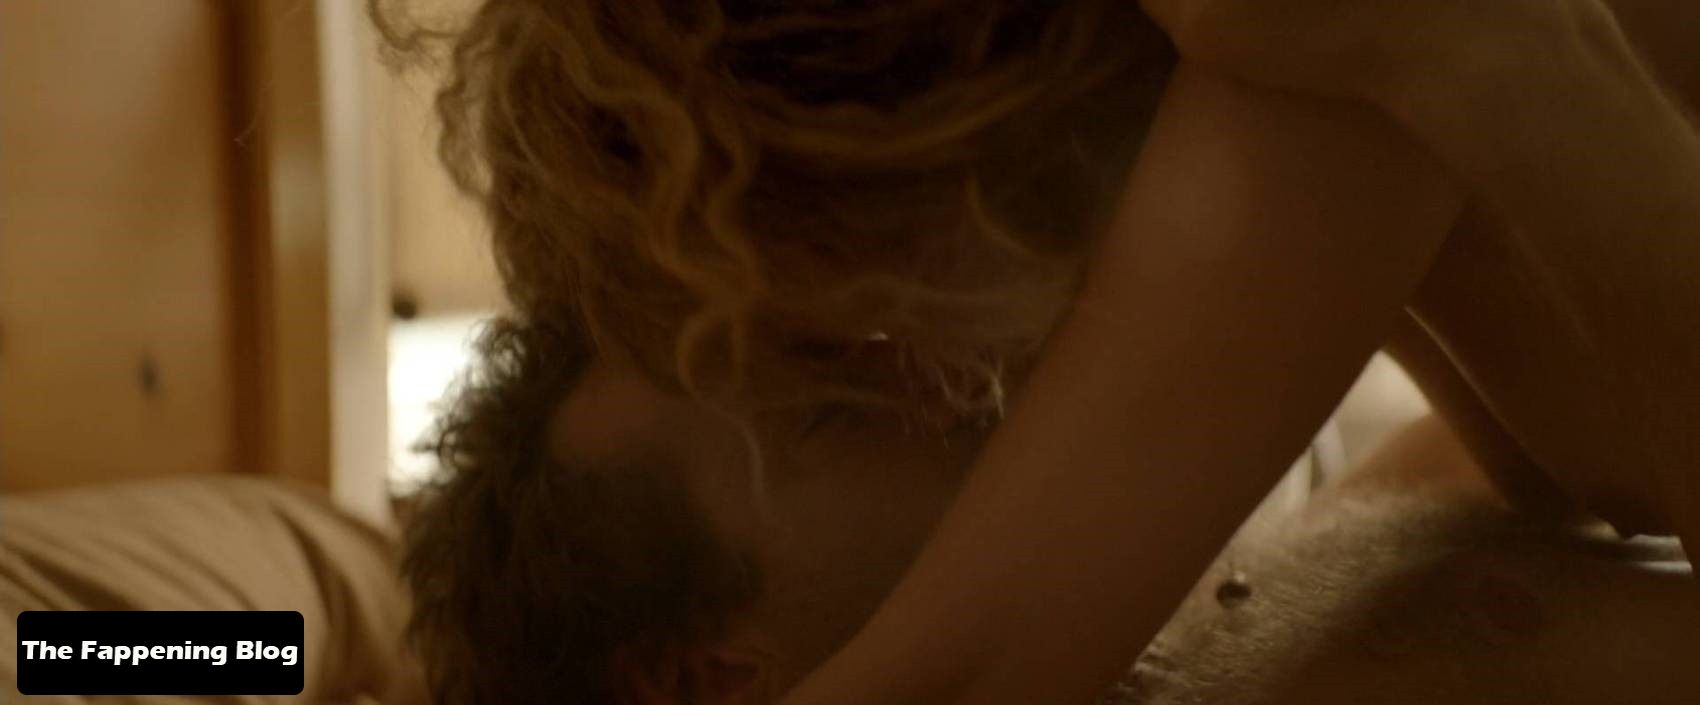 Juno-Temple-Nude-The-Fappening-Blog-8.jpg